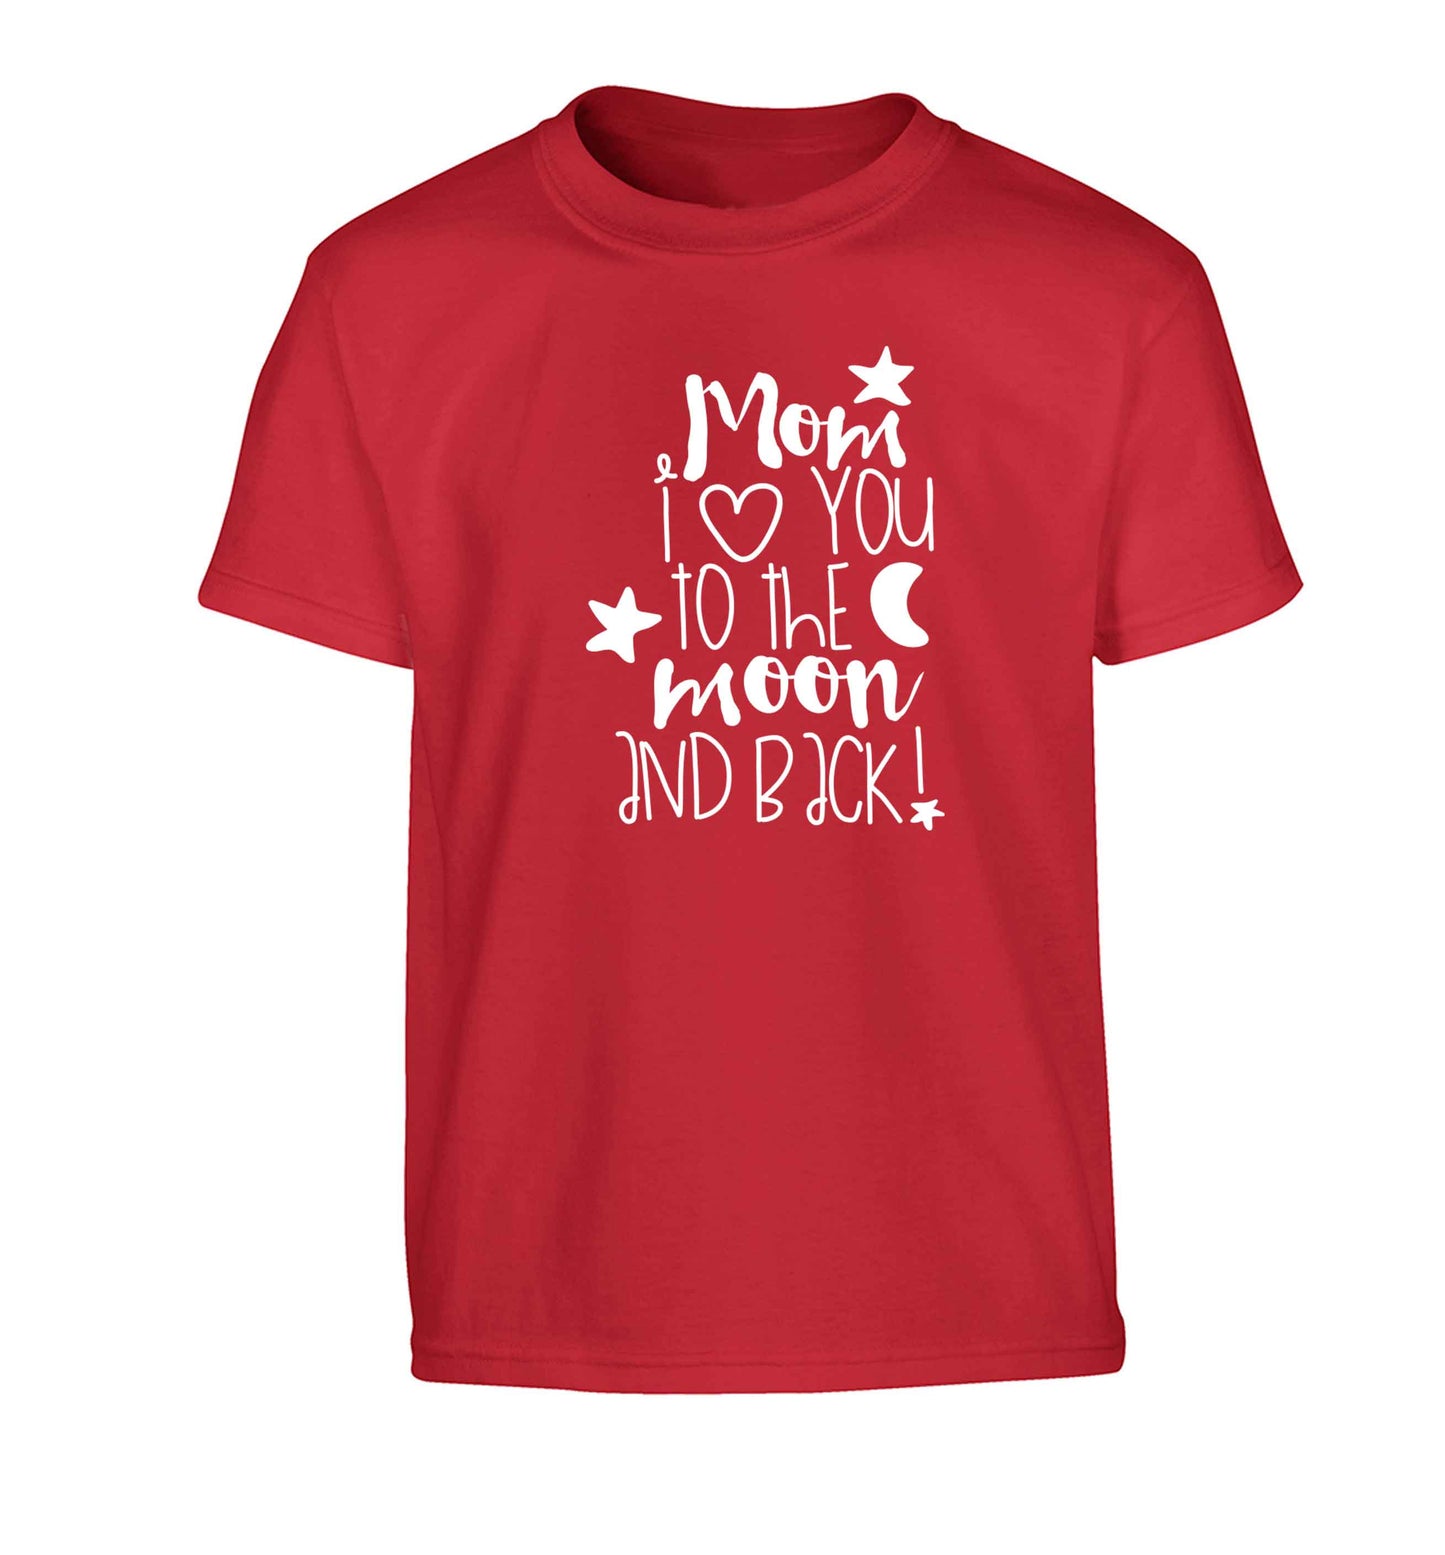 Mom I love you to the moon and back Children's red Tshirt 12-13 Years